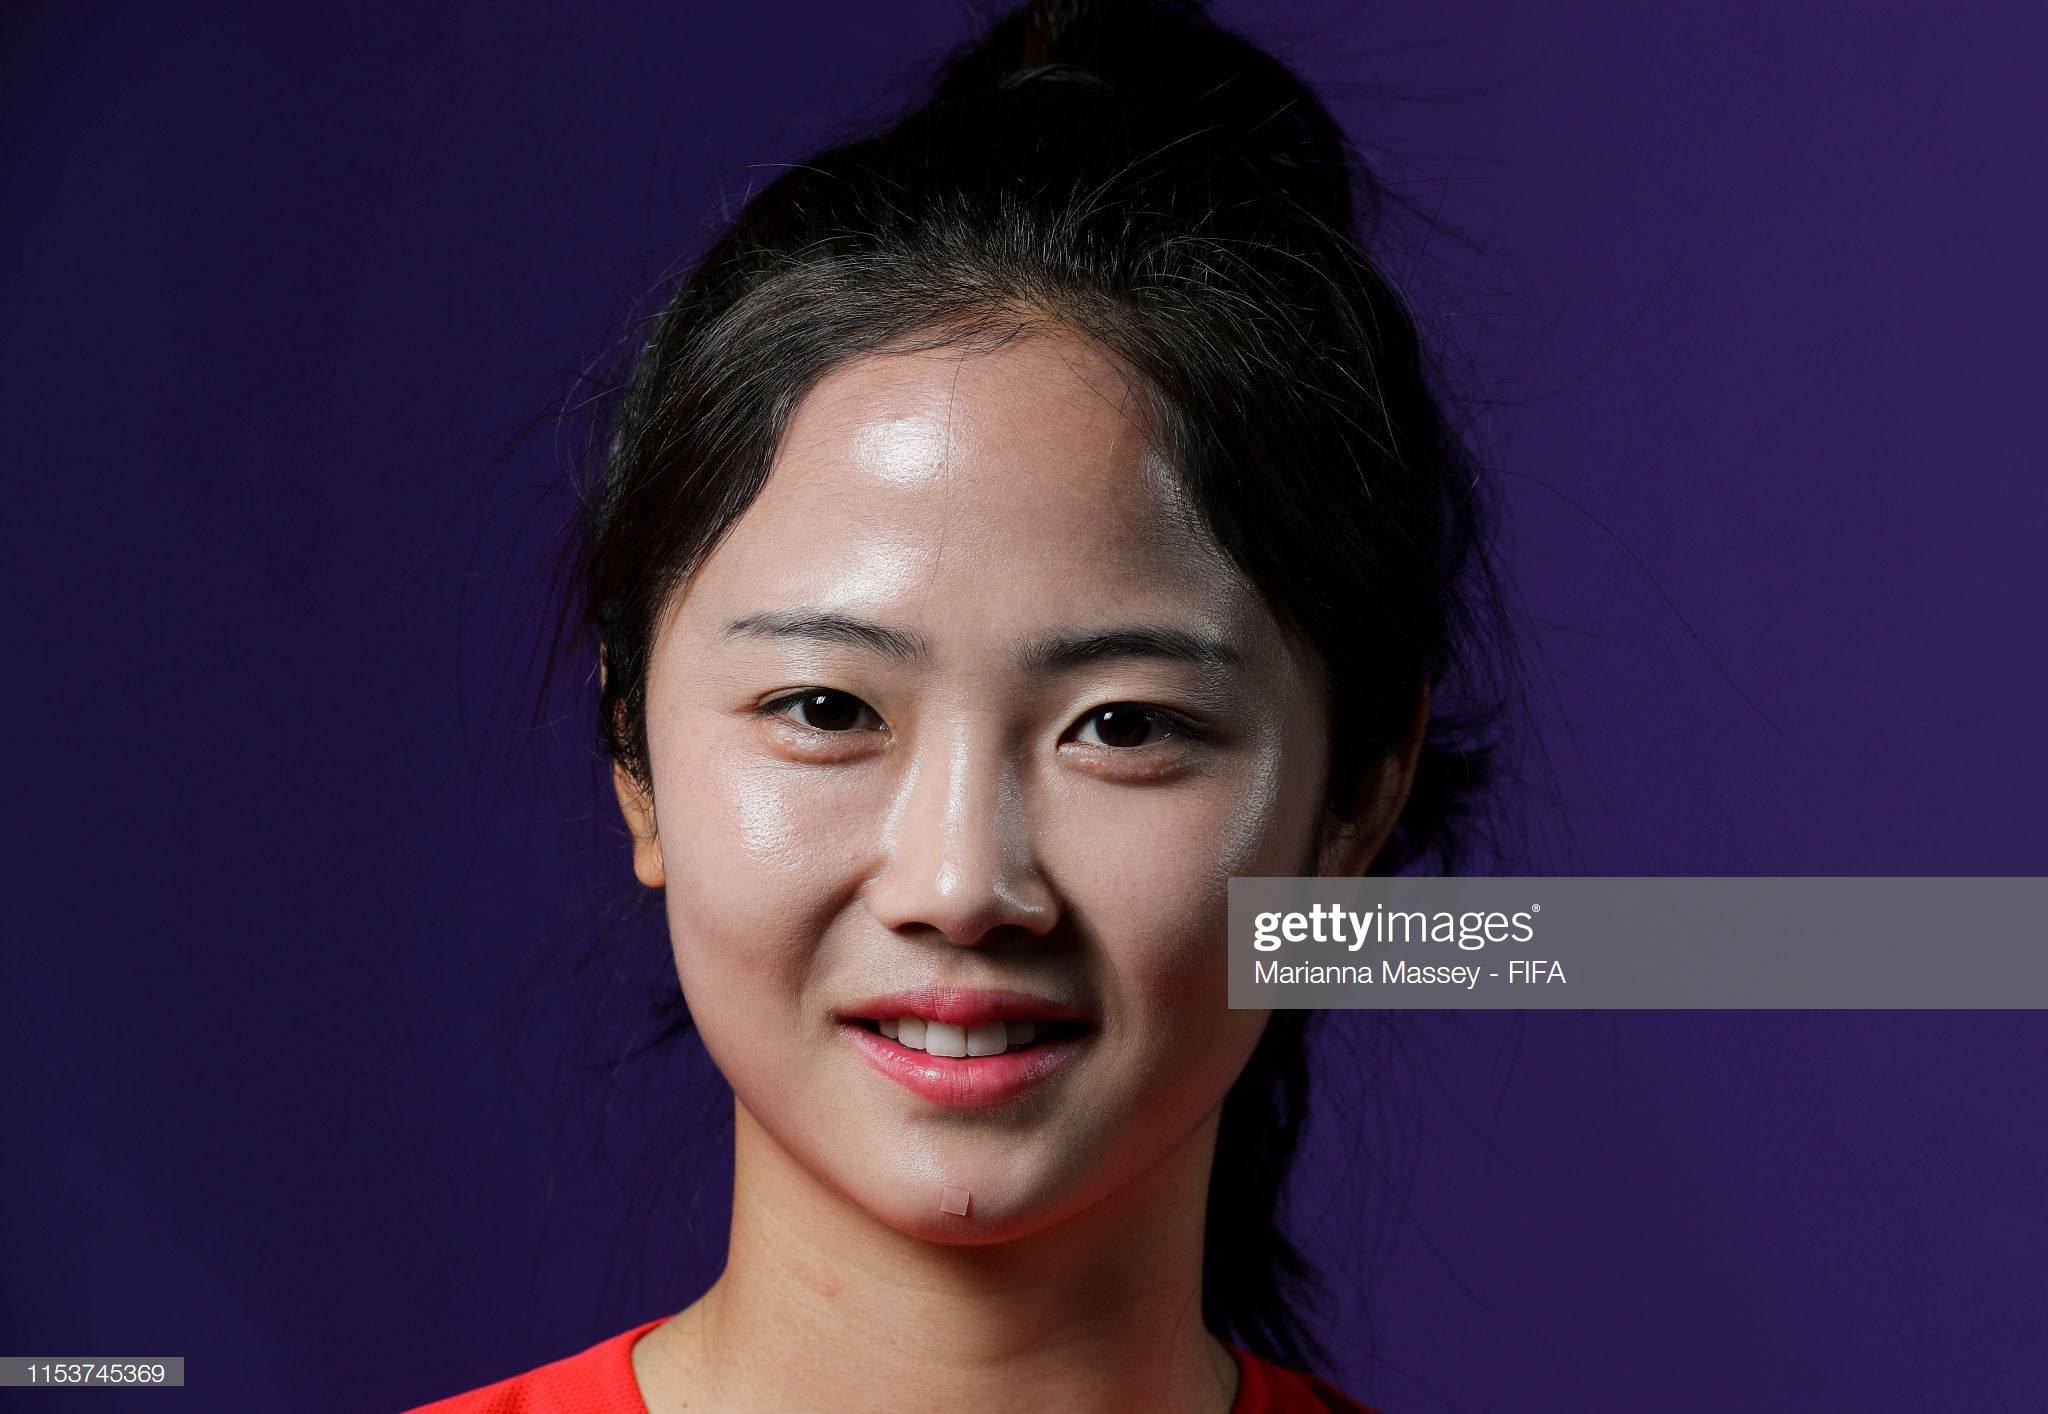 gettyimages-1153745369-2048x2048.jpg